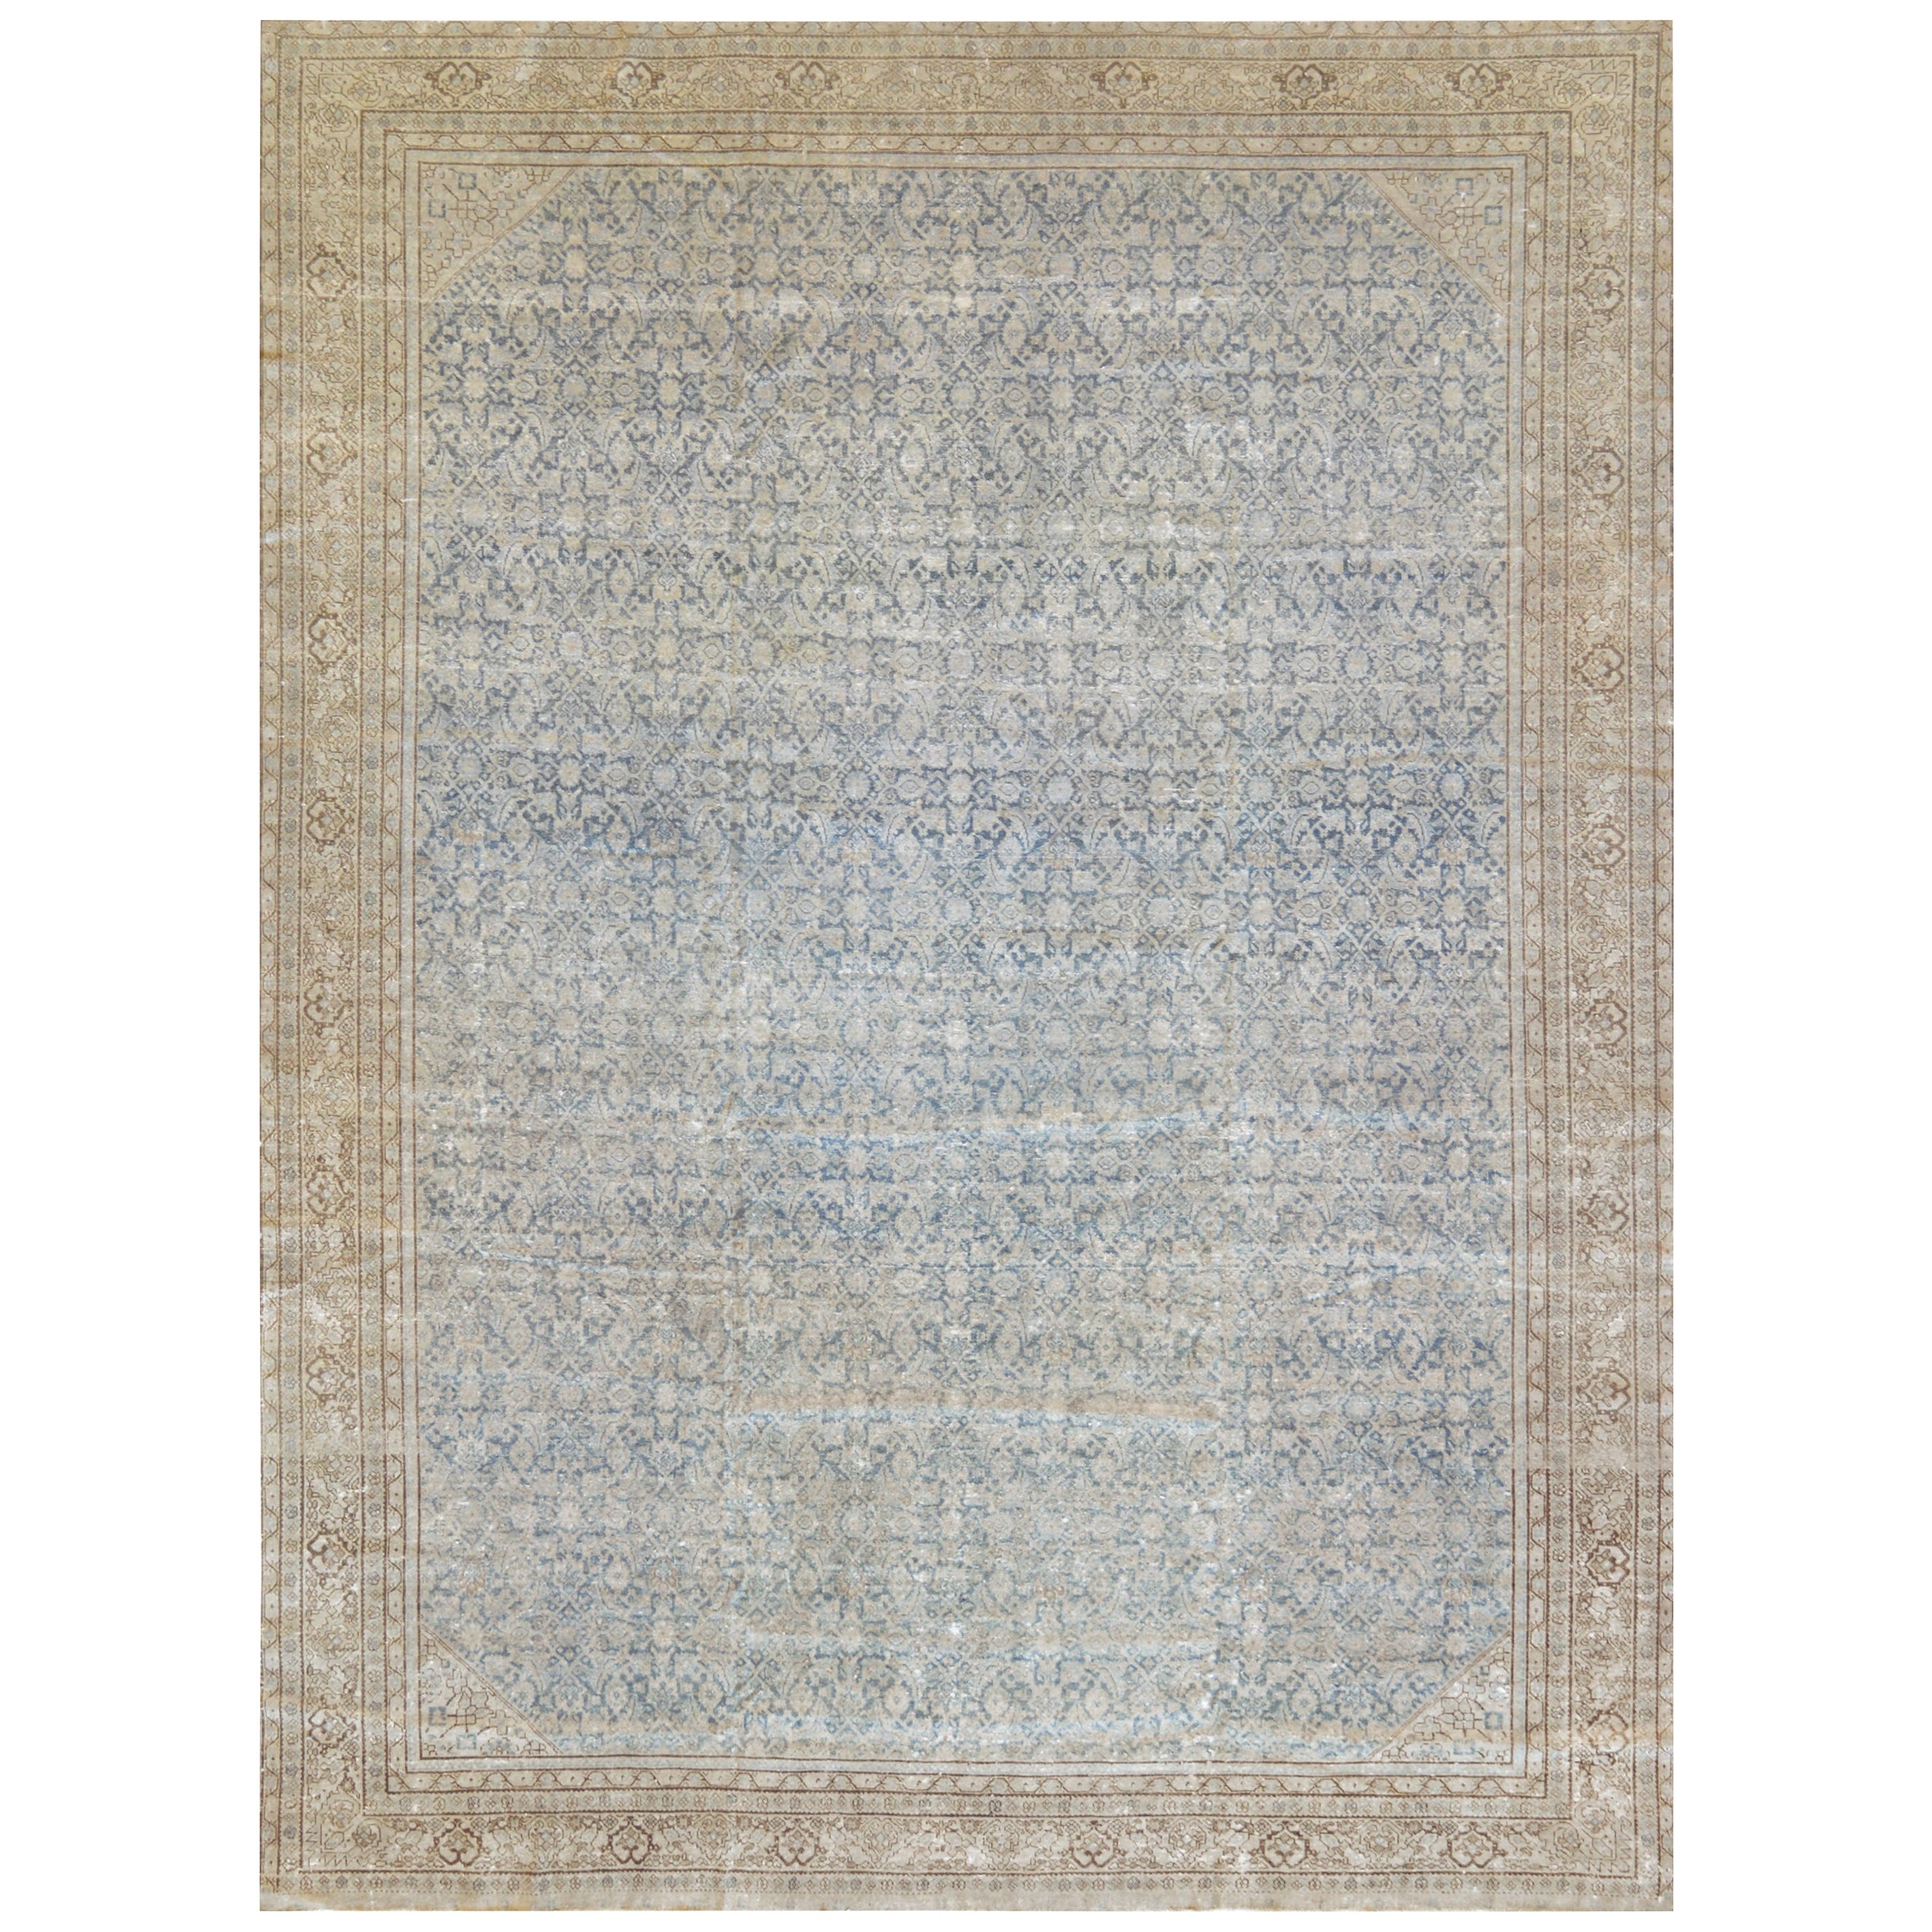 Early 20th Century Wool Heriz Rug from North West Persia For Sale at ...